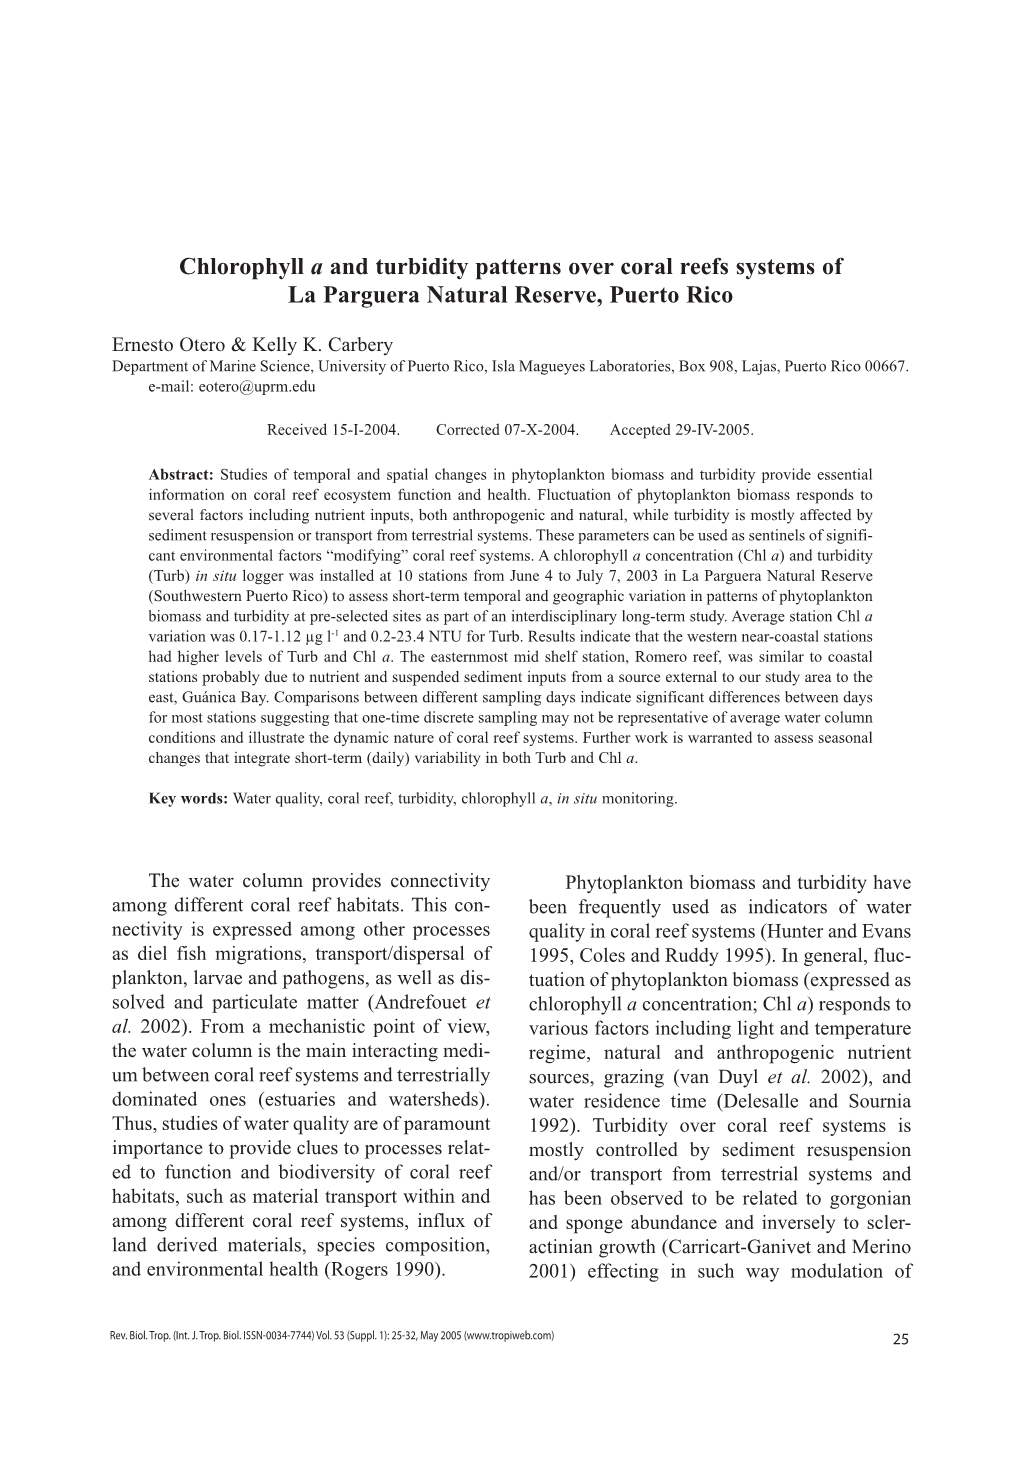 Chlorophyll a and Turbidity Patterns Over Coral Reefs Systems of La Parguera Natural Reserve, Puerto Rico